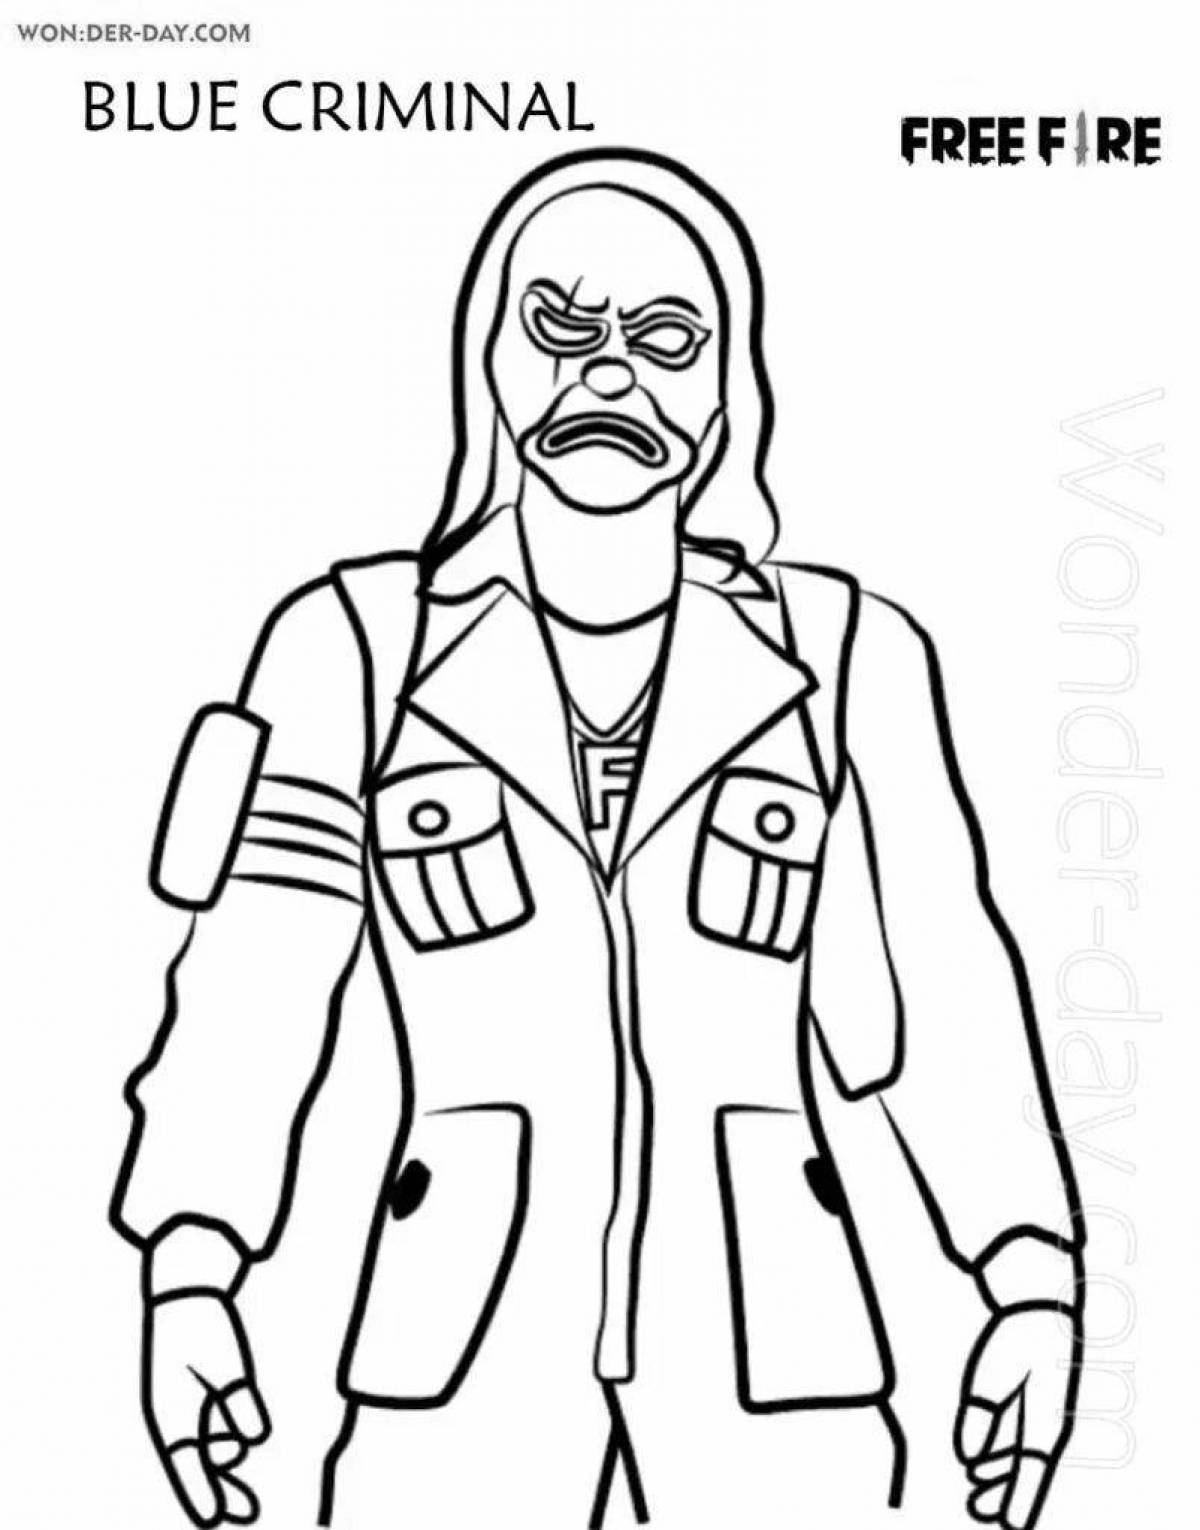 Charming pro free fire weapon coloring page